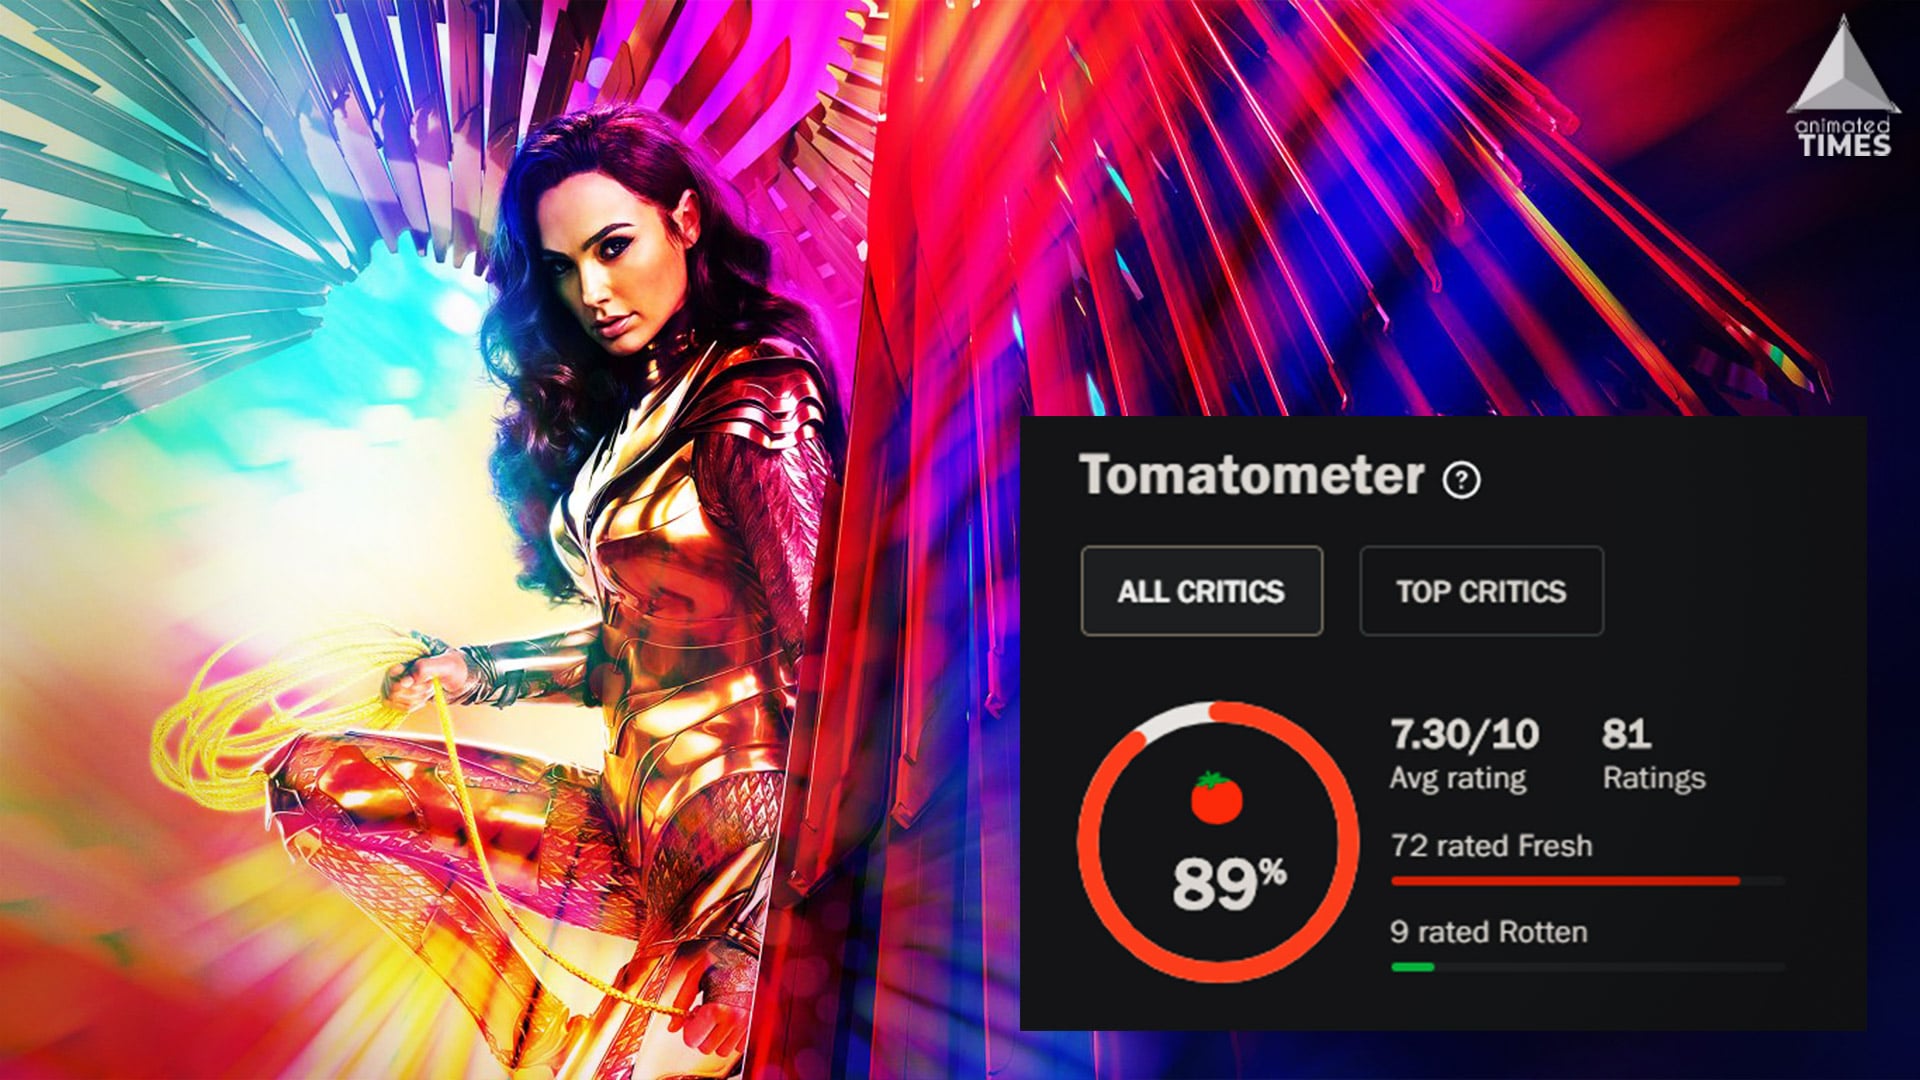 Wonder Woman 1984 Rotter Tomatoes Score Shows How Critics Are Loving The Sequel